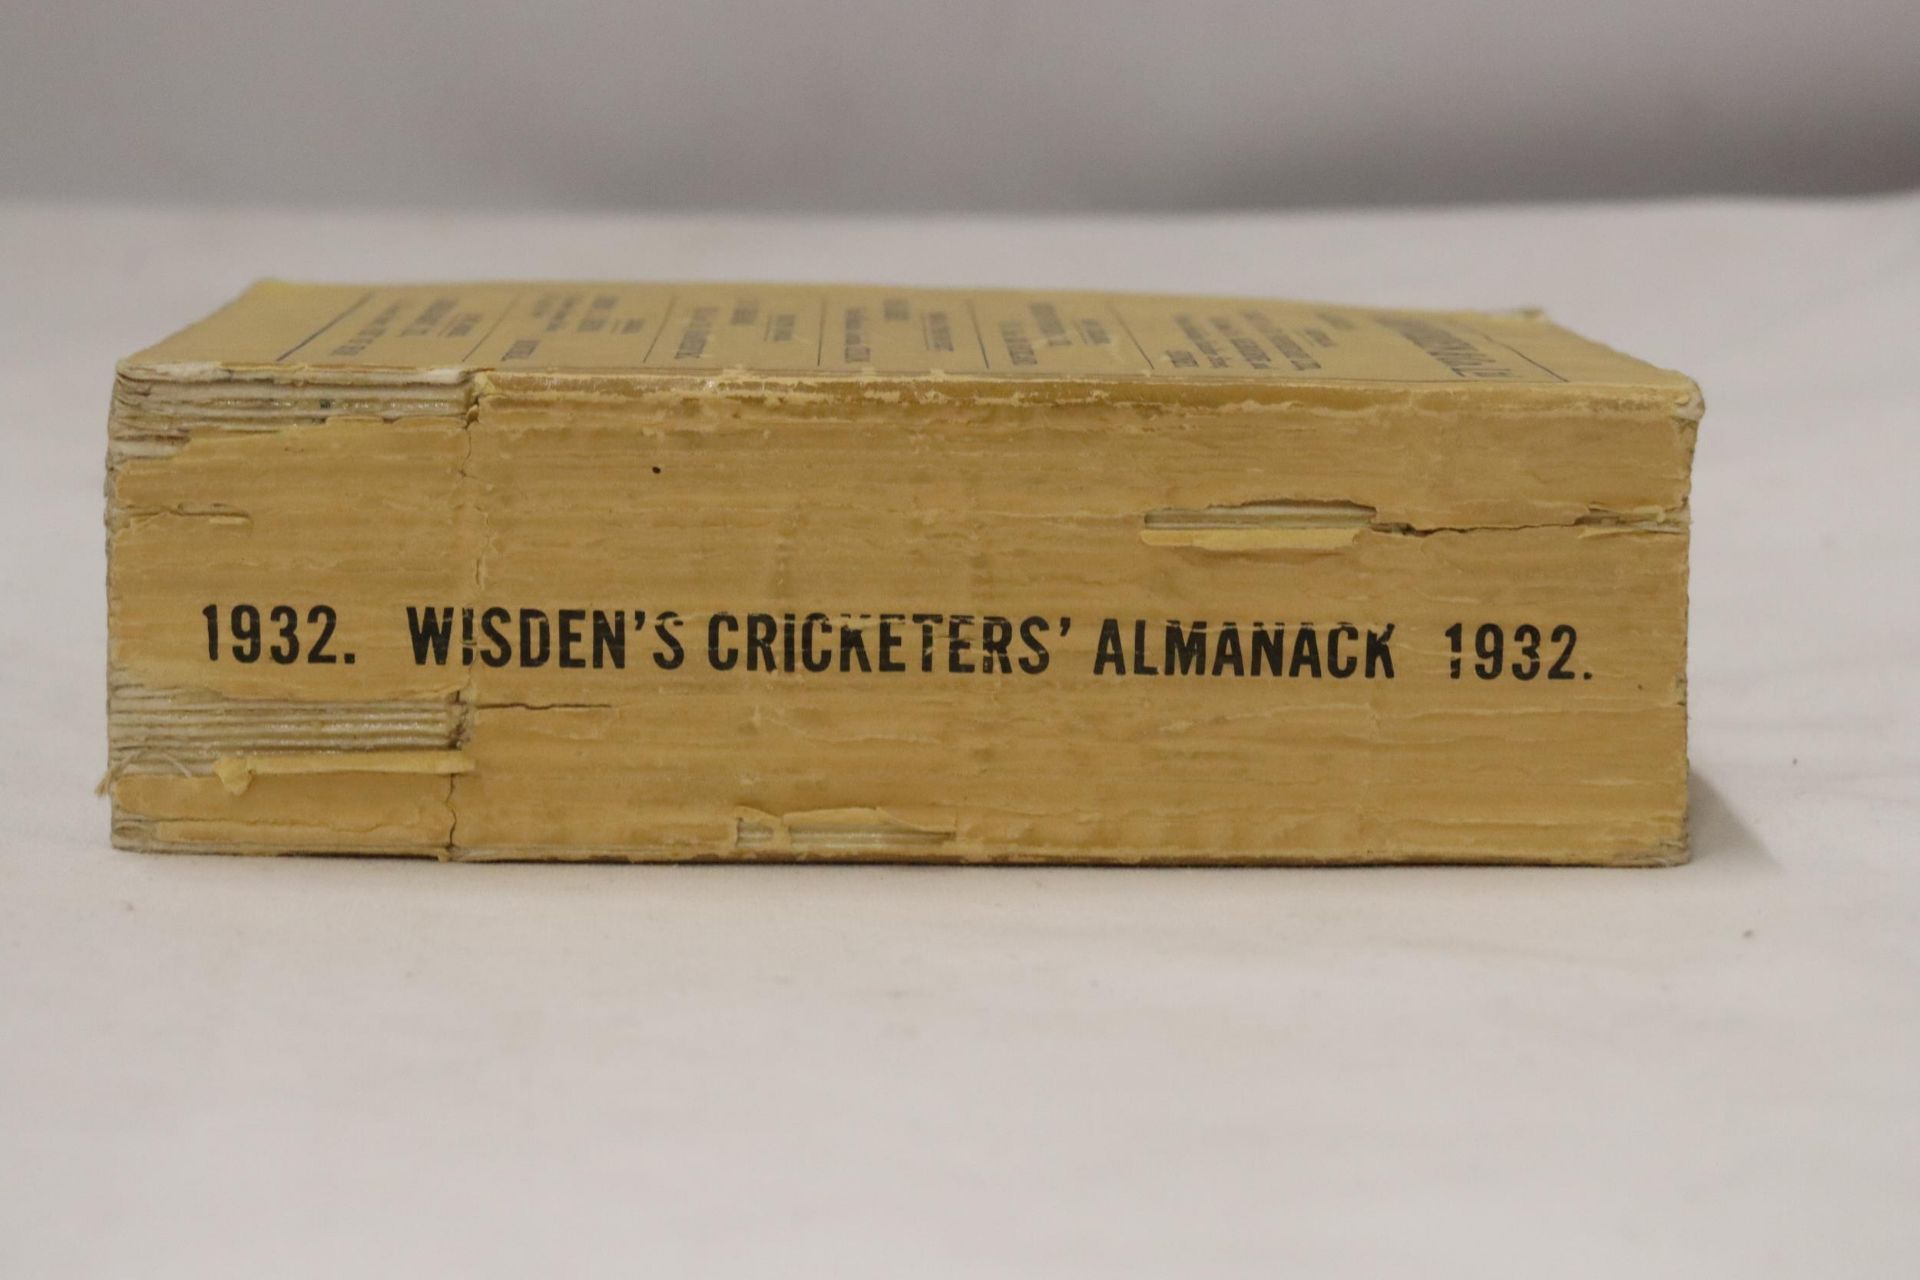 A 1932 COPY OF WISDEN'S CRICKETER'S ALMANACK. THIS COPY IS IN USED CONDITION, MISSING PART OF THE - Image 2 of 4